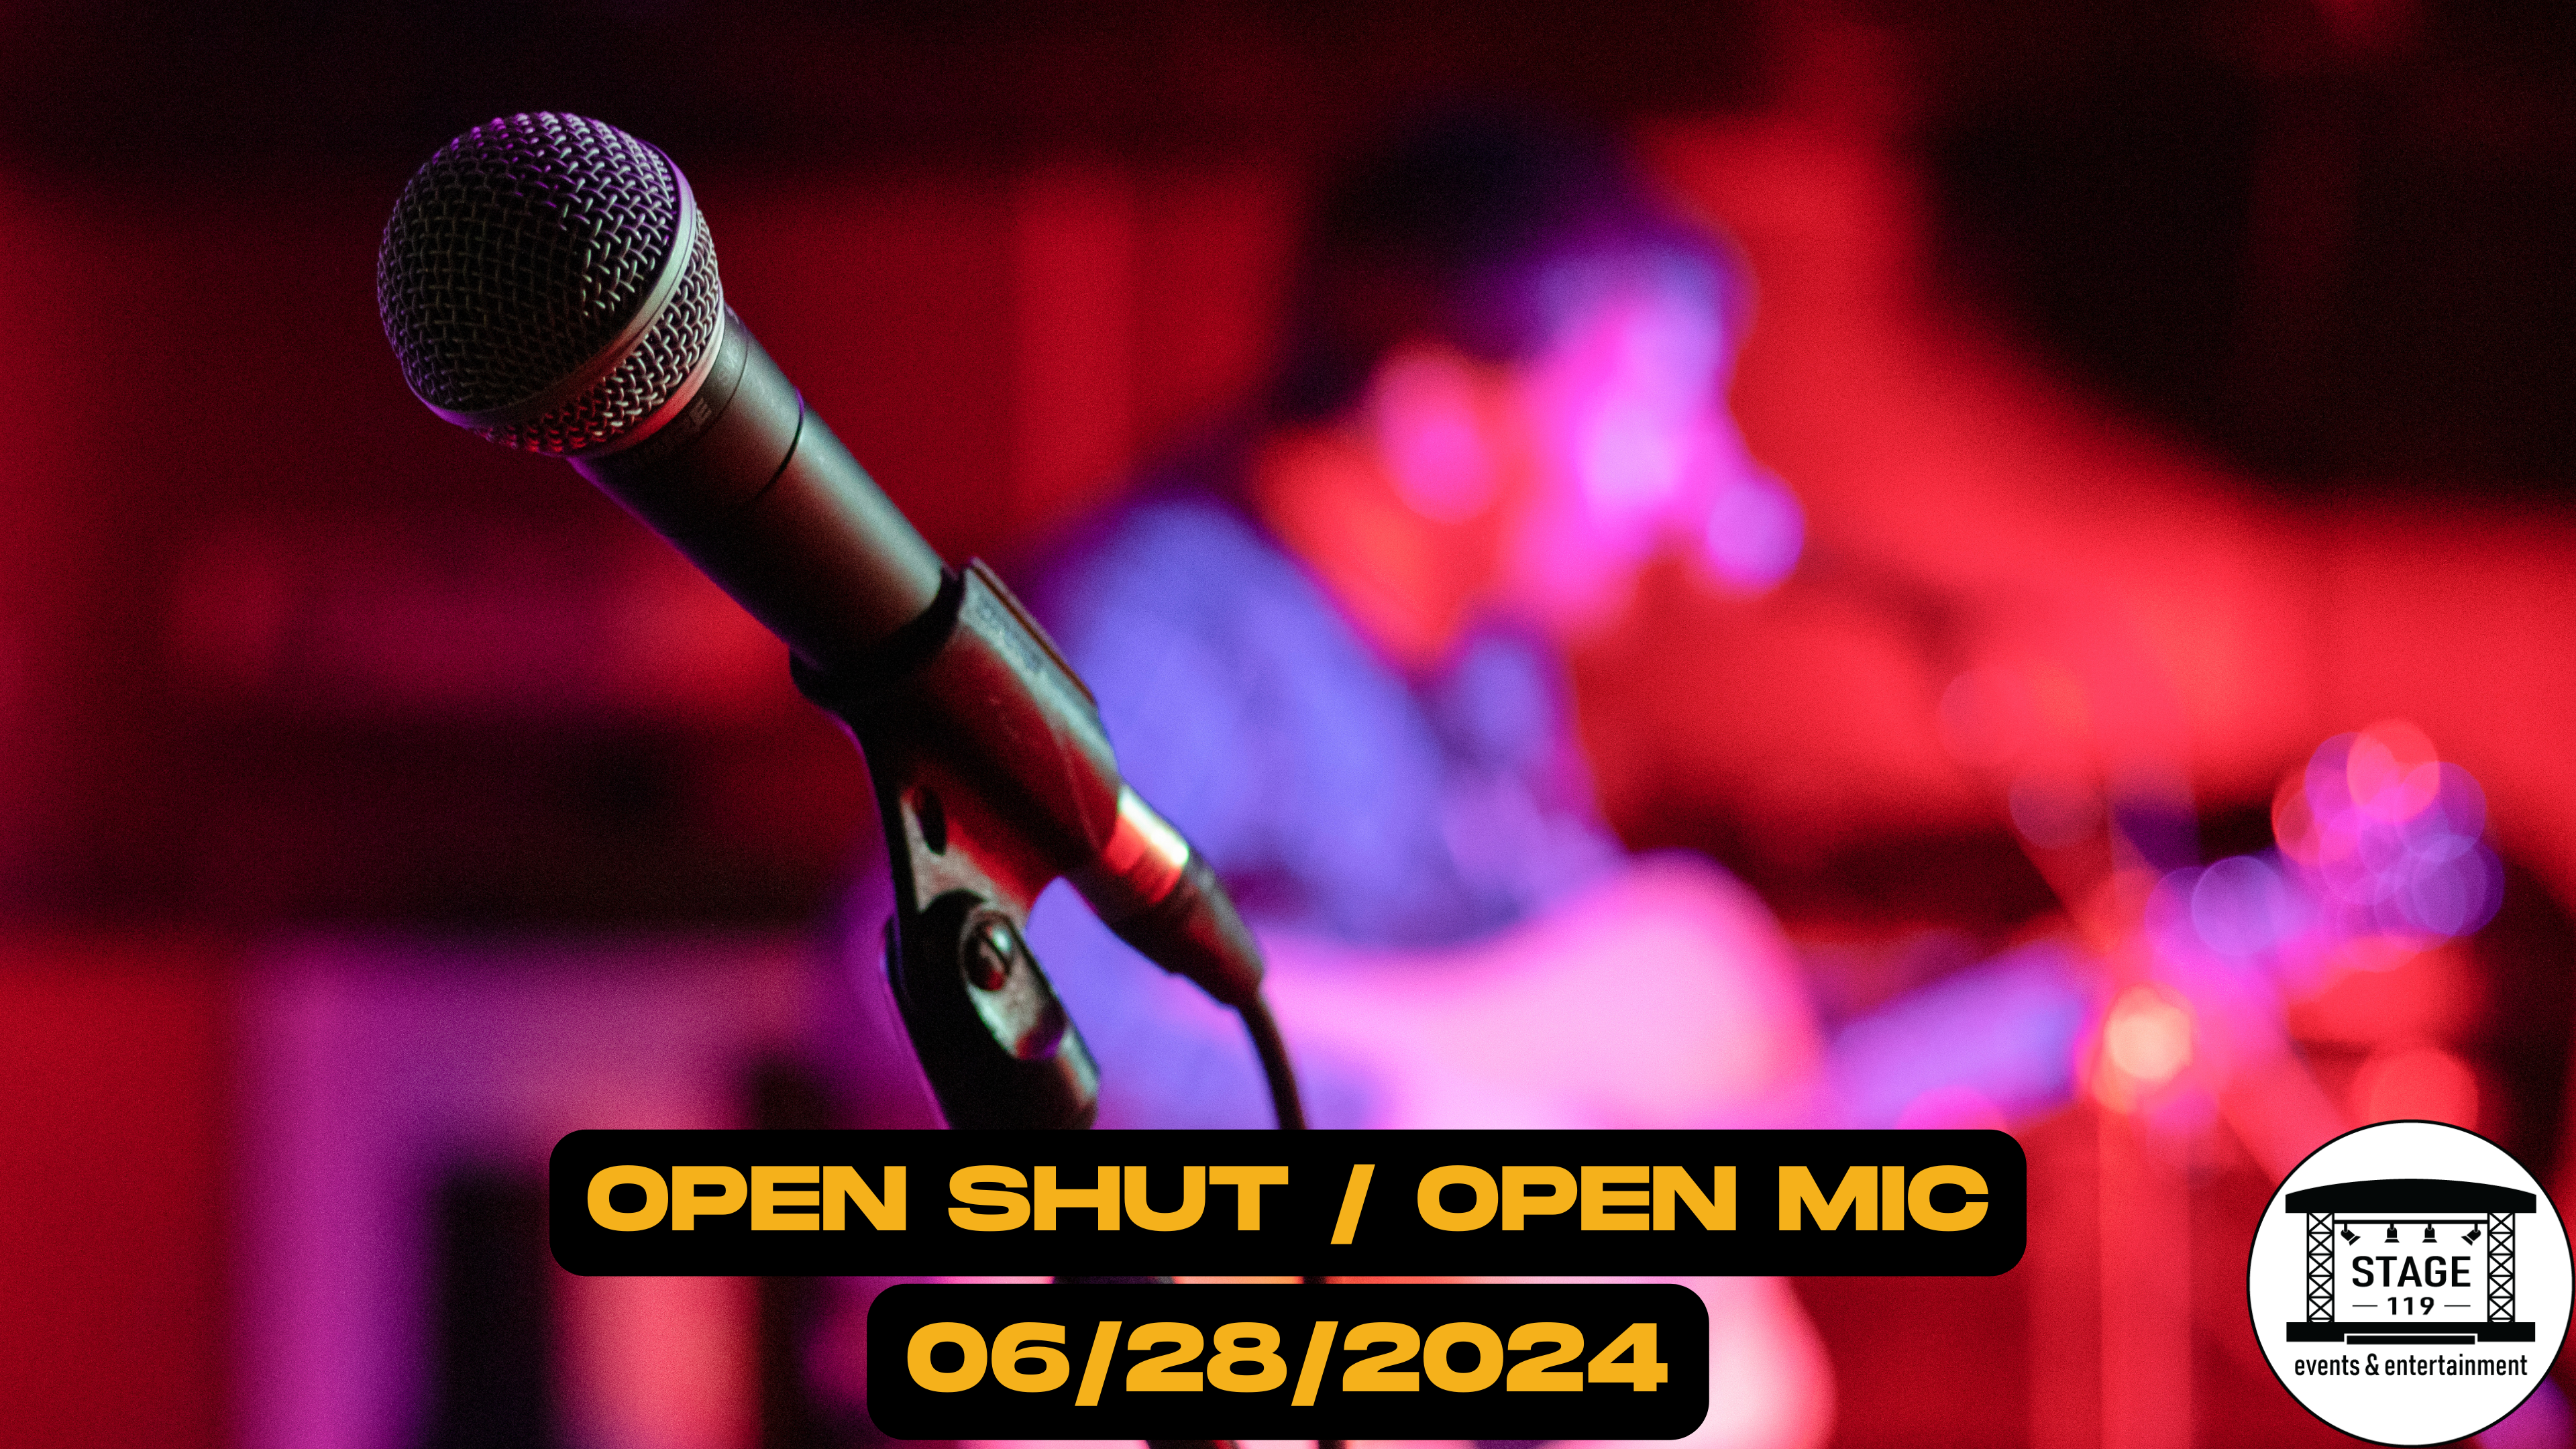 OPEN SHUT / Open Mic at Stage 119